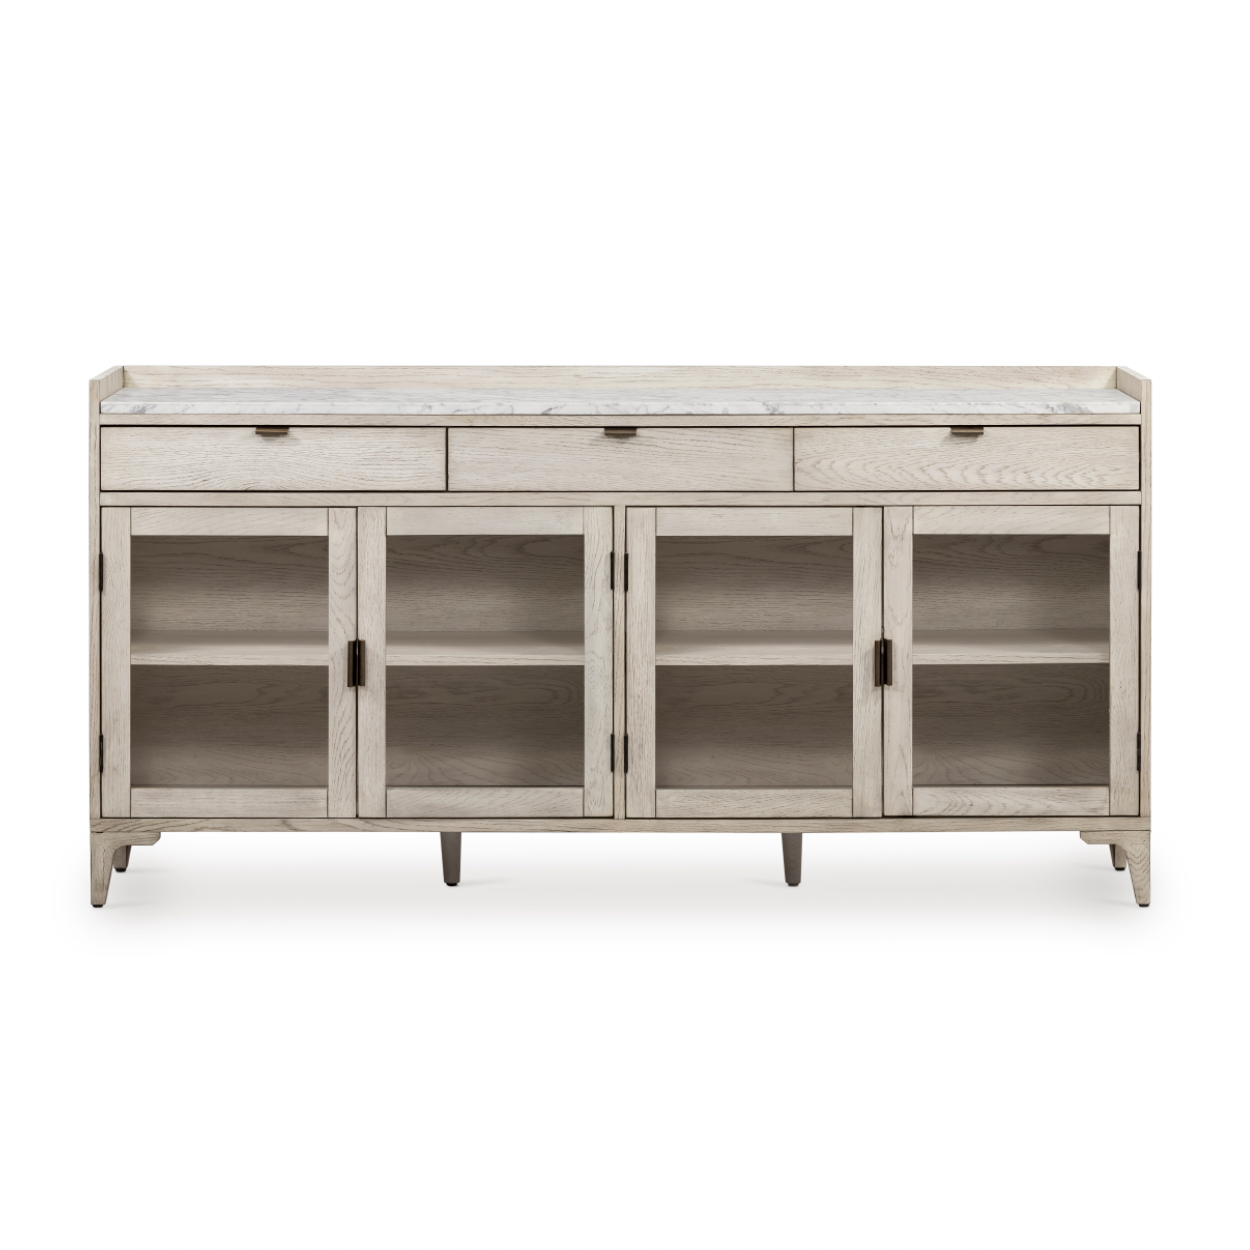 This Viggo Vintage White Oak Sideboard has three function drawers with glass bottom doors opening to spacious interior shelving -- perfect for storing your favorite china or family heirlooms. The vintage white oak color brings an antique, rustic appeal to any kitchen or dining area while the marble top gives the space a more modern look.   Overall Dimensions: 72.00"w x 17.00"d x 36.00"h Materials: Oak Veneer, Solid Marble